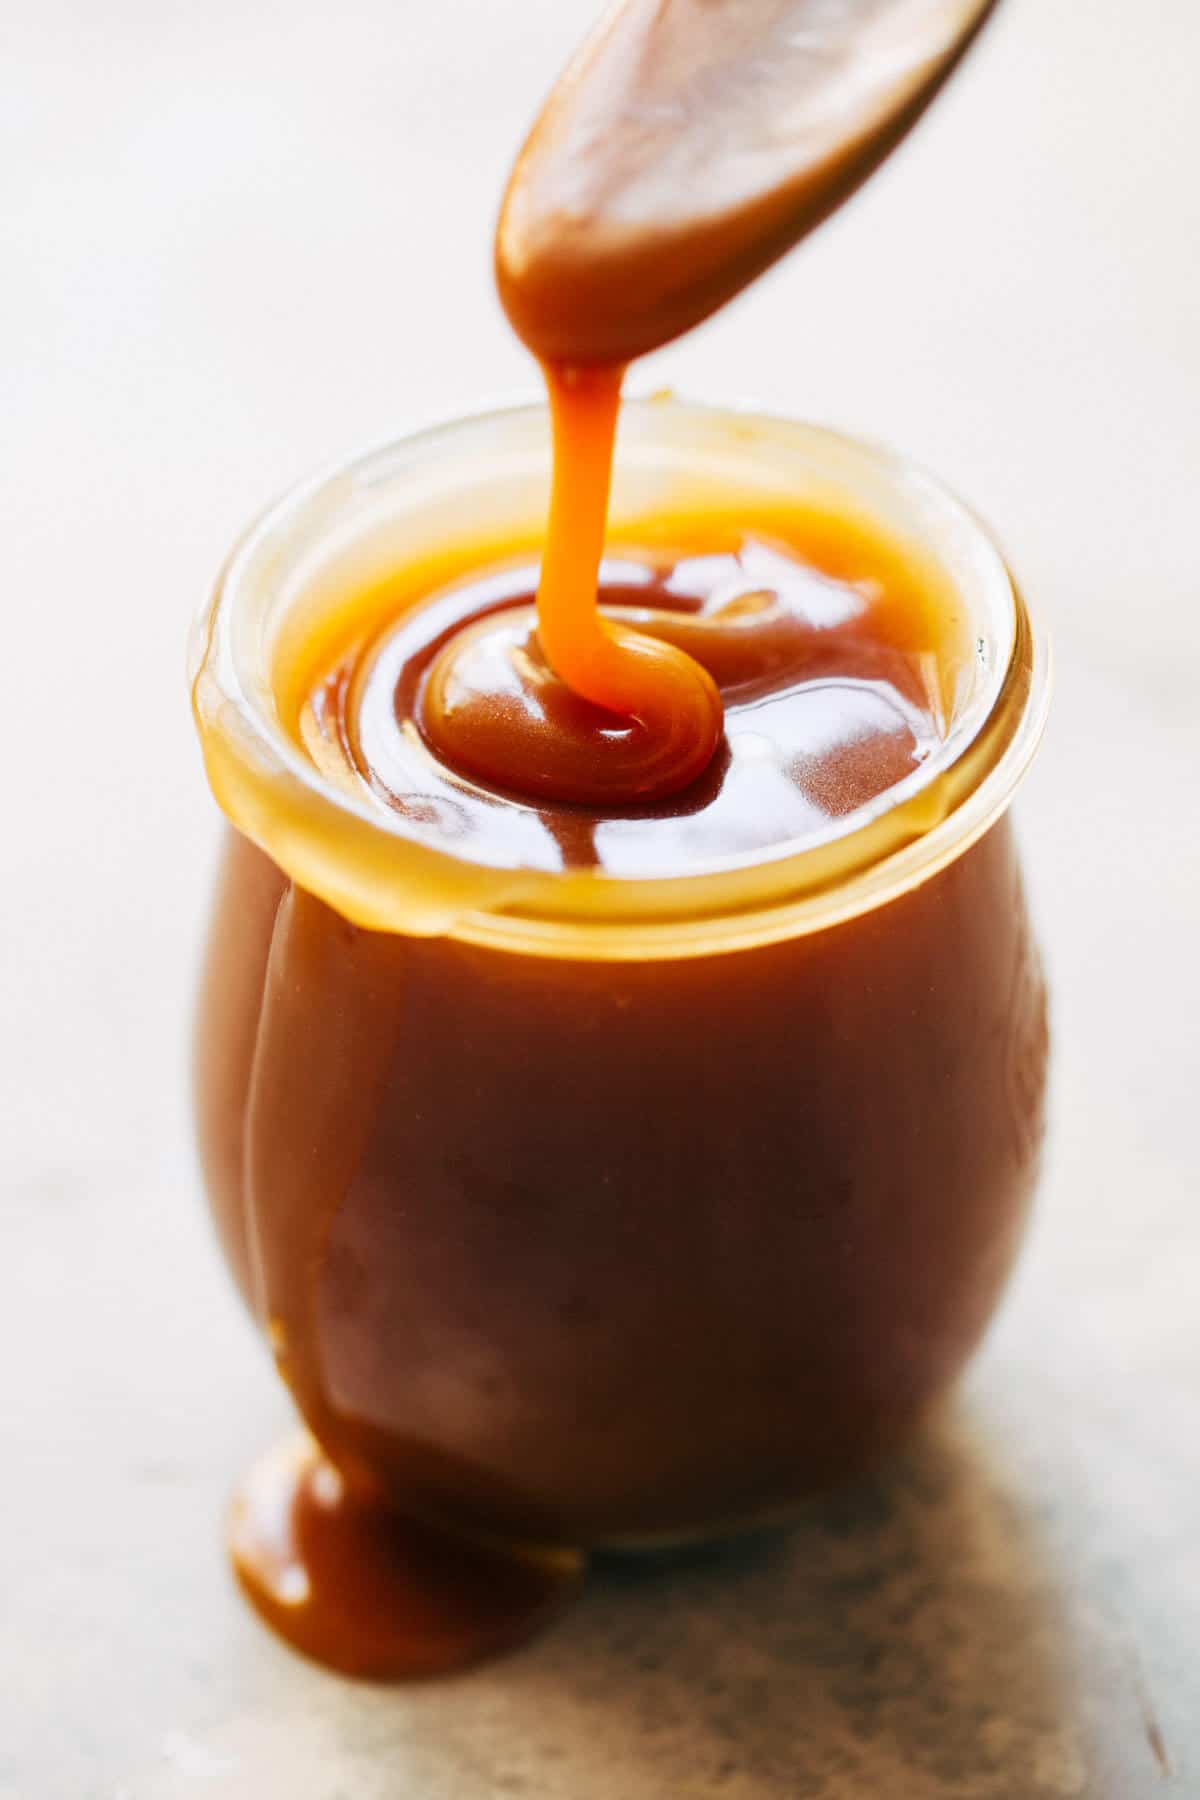 a jar of homemade salted caramel with a spoon drizzling caramel into it